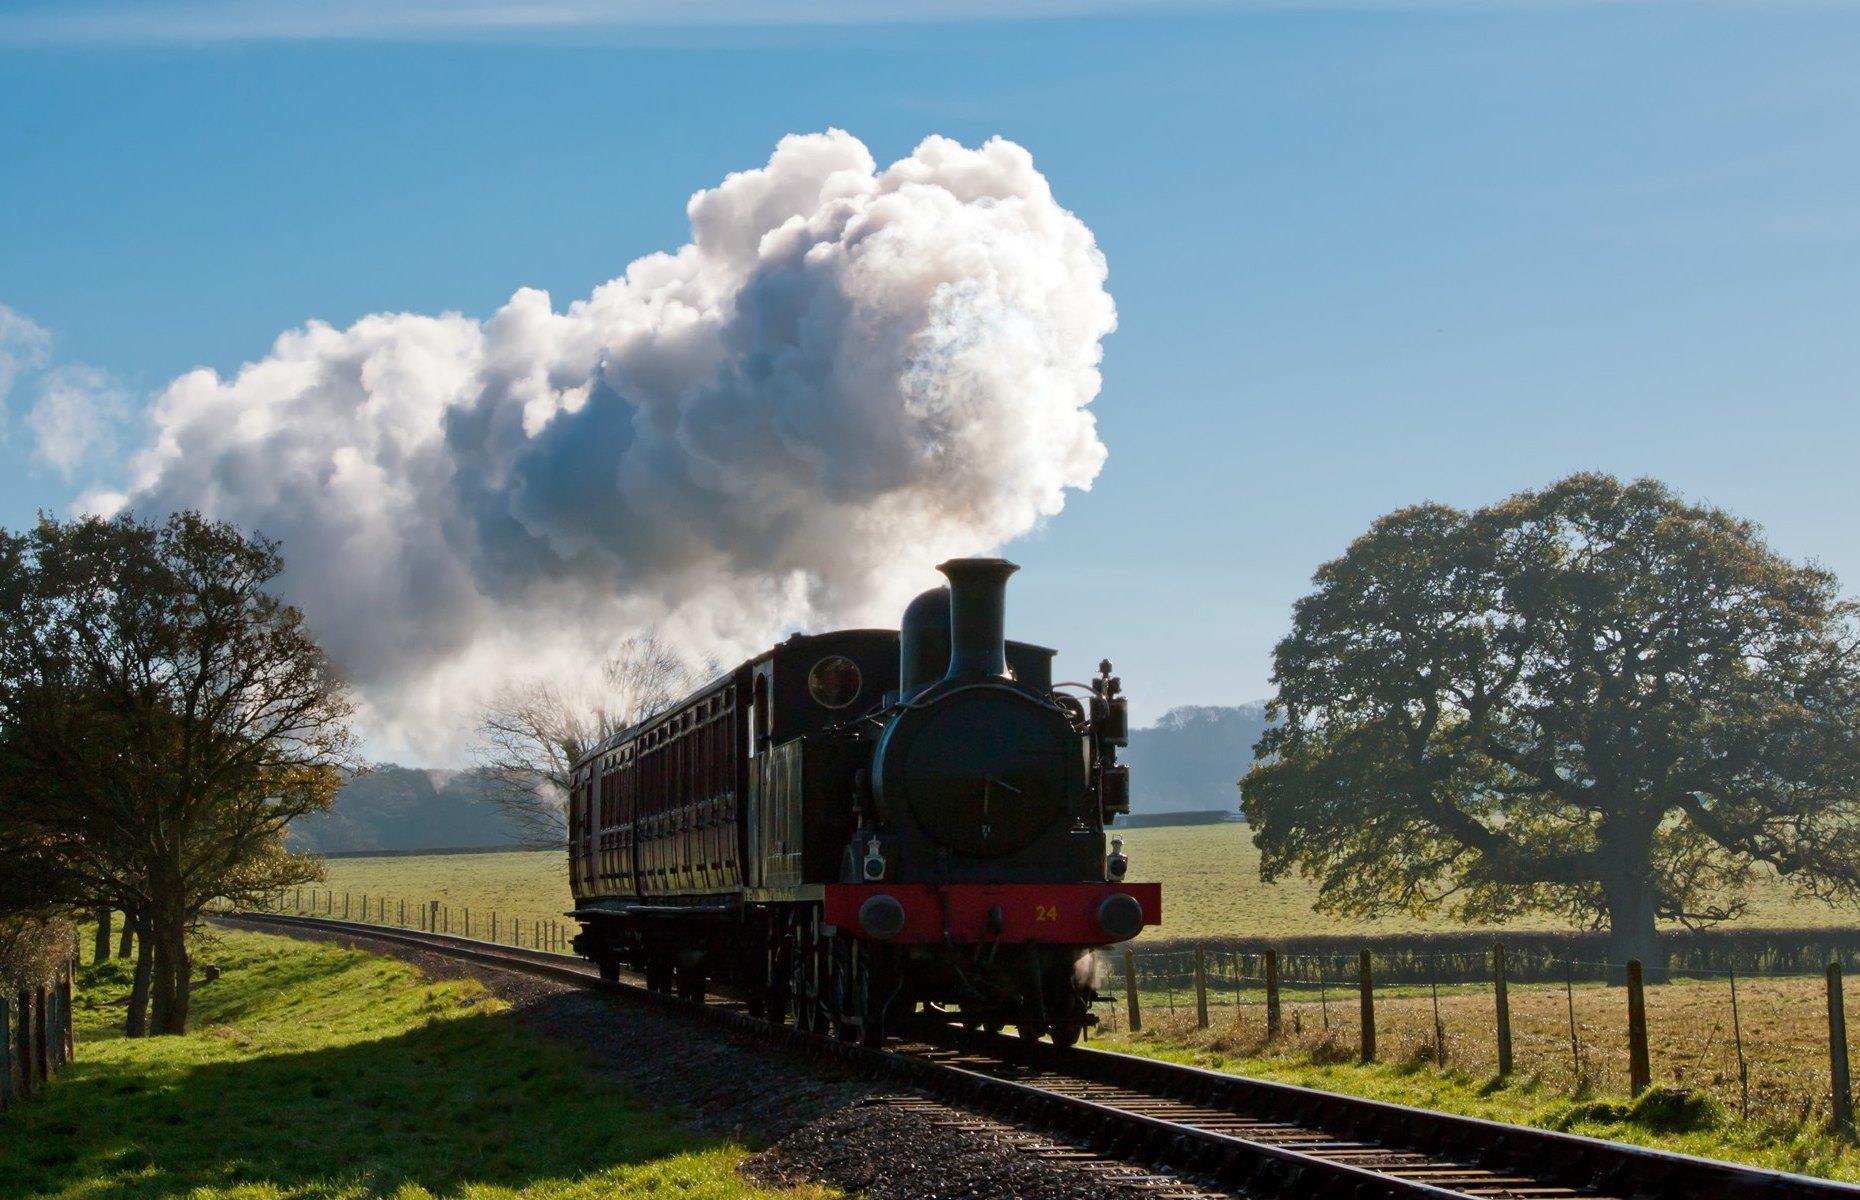 <p>A heritage line with locomotives dating back to the 1860s, the <a href="https://iwsteamrailway.co.uk/">Isle of Wight Steam Railway</a> offers a glimpse into the UK’s golden age of train travel. With steam engines and beautifully restored Victorian and Edwardian carriages, the journey skims around five-and-a-half miles (9km) from Smallbrook Junction to Wootton. The award-winning railway tours through the Isle of Wight’s idyllic countryside and ancient woodland that's buzzing with wildlife. Inside the railway shop at Havenstreet Station, there is a small gallery with artefacts exploring the steam railway’s history including nameplates and tools.</p>